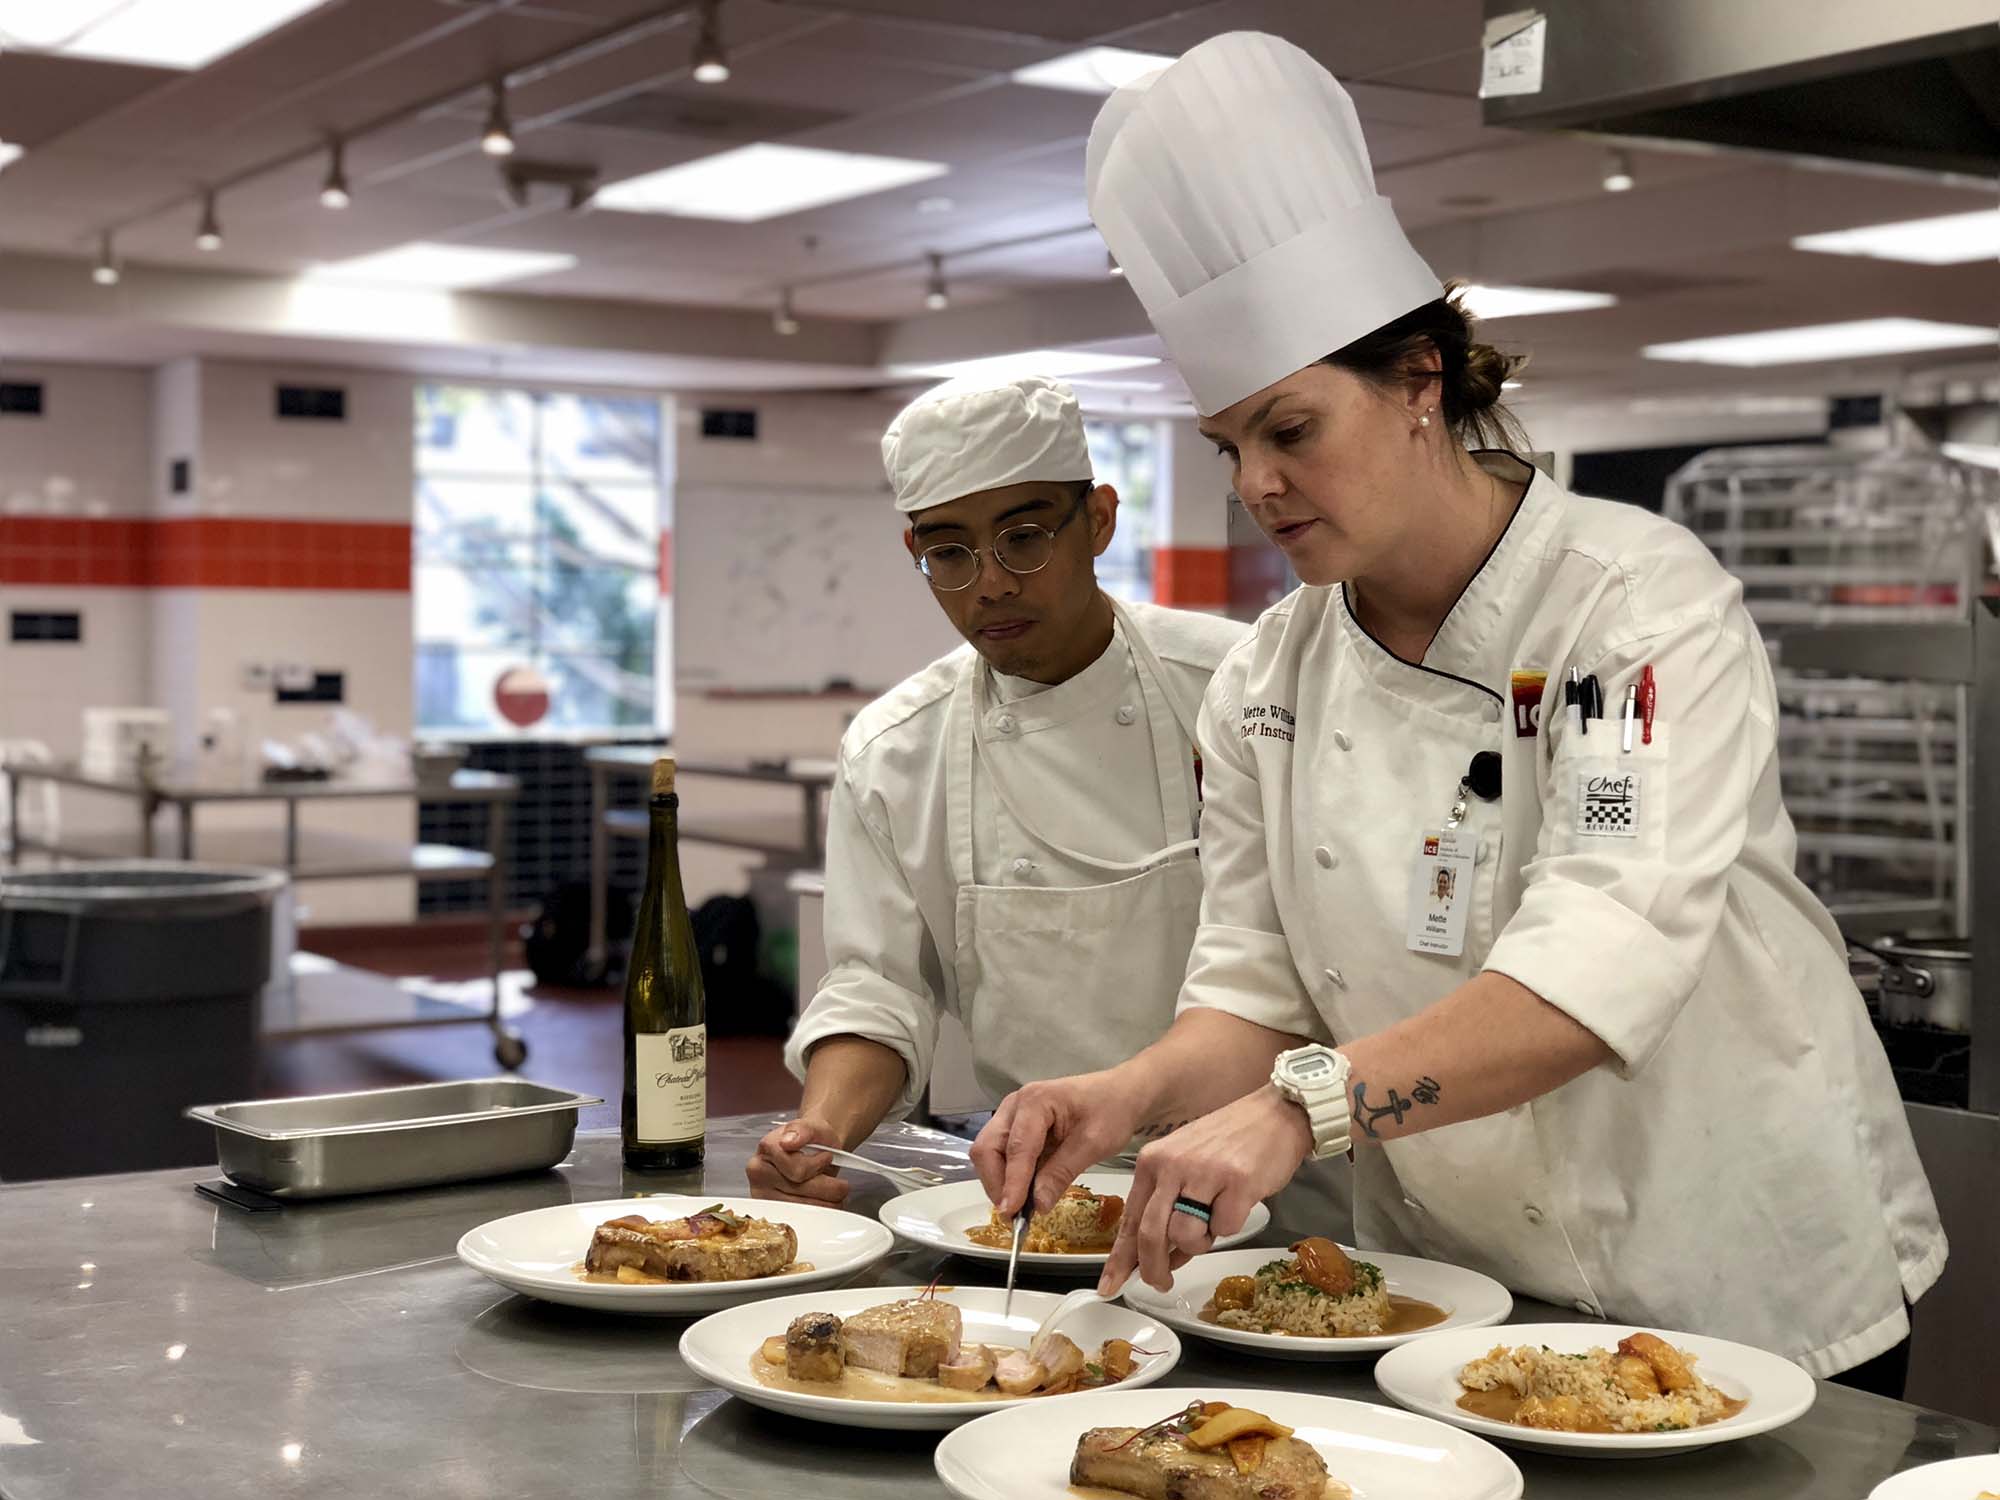 Chef-Instructor Mette Williams works with Culinary Arts students on a pork chop dish.